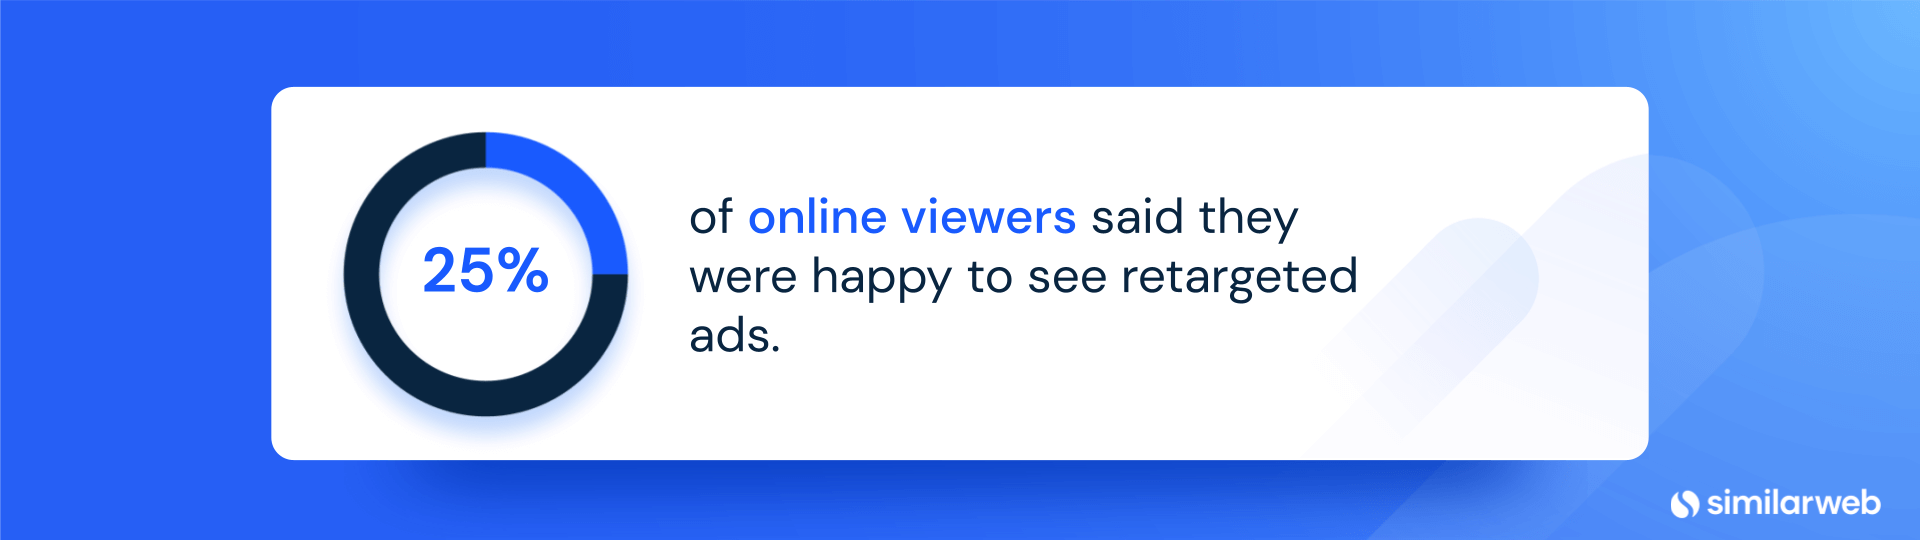 25% of online viewers said they were happy to see retargeted ads.